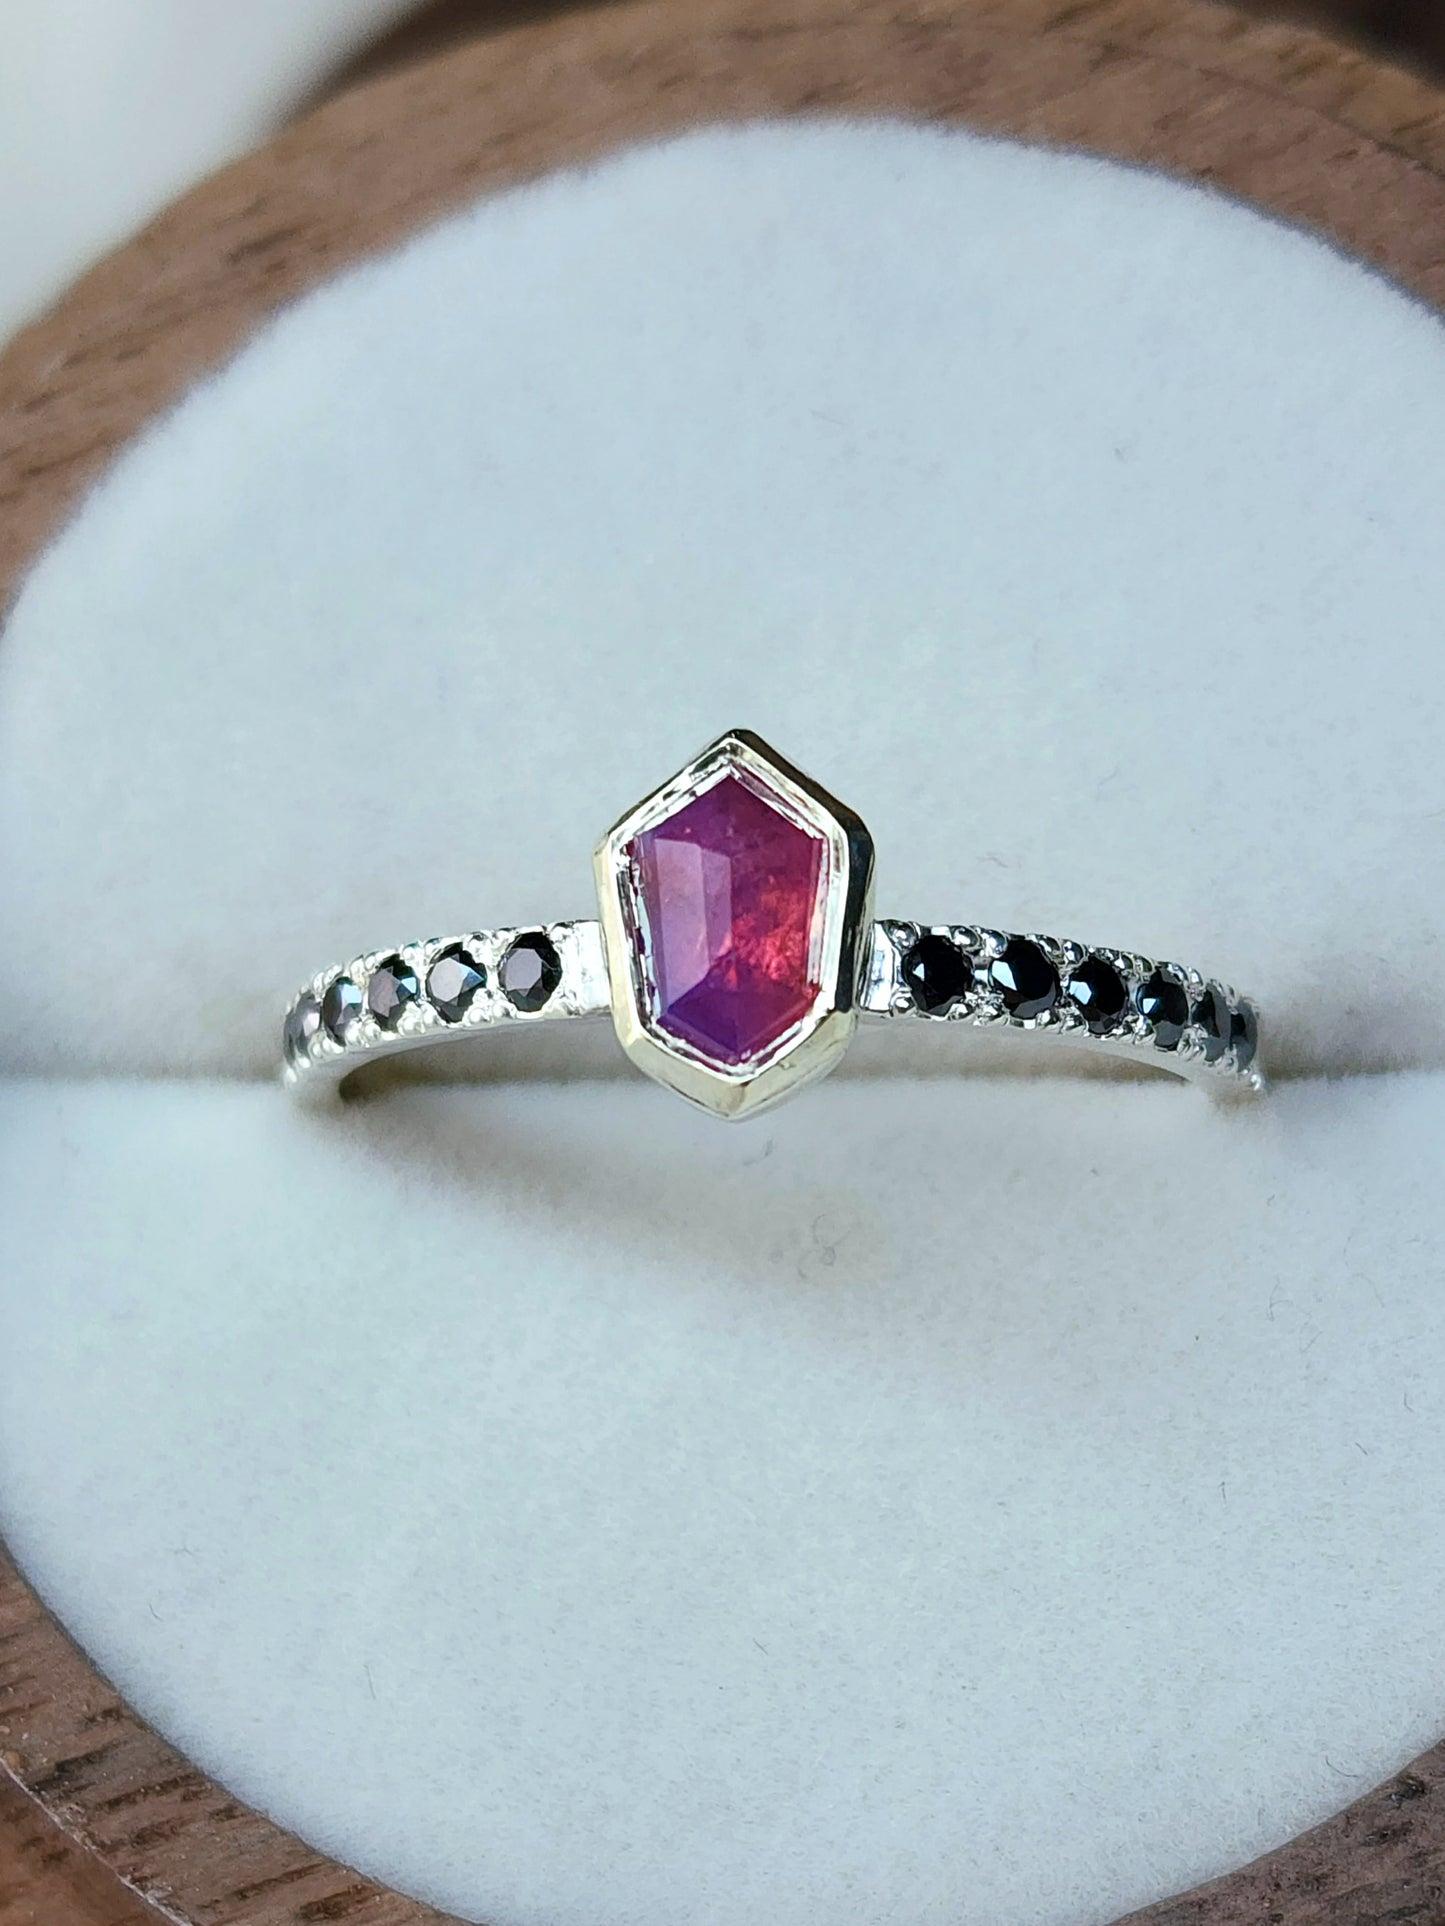 Opalescent pink sapphire shield winza sapphire sterling silver ring with 12-1.5 mm pave set black moissanites in a 10 karat yellow gold bezel